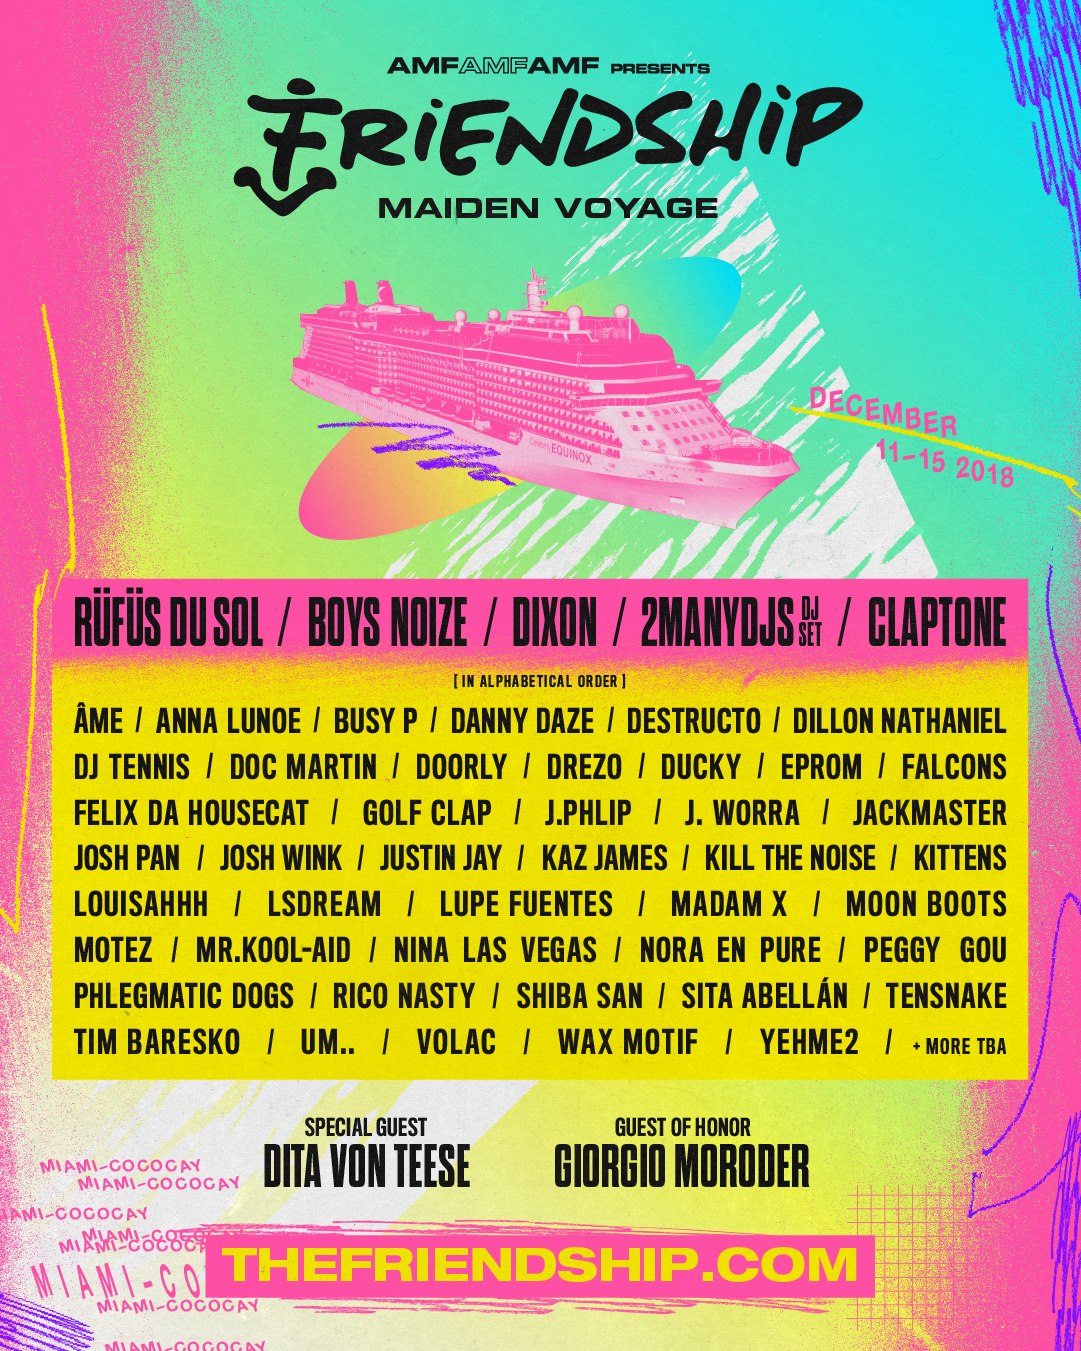 FriendShip 2018 Lineup poster image